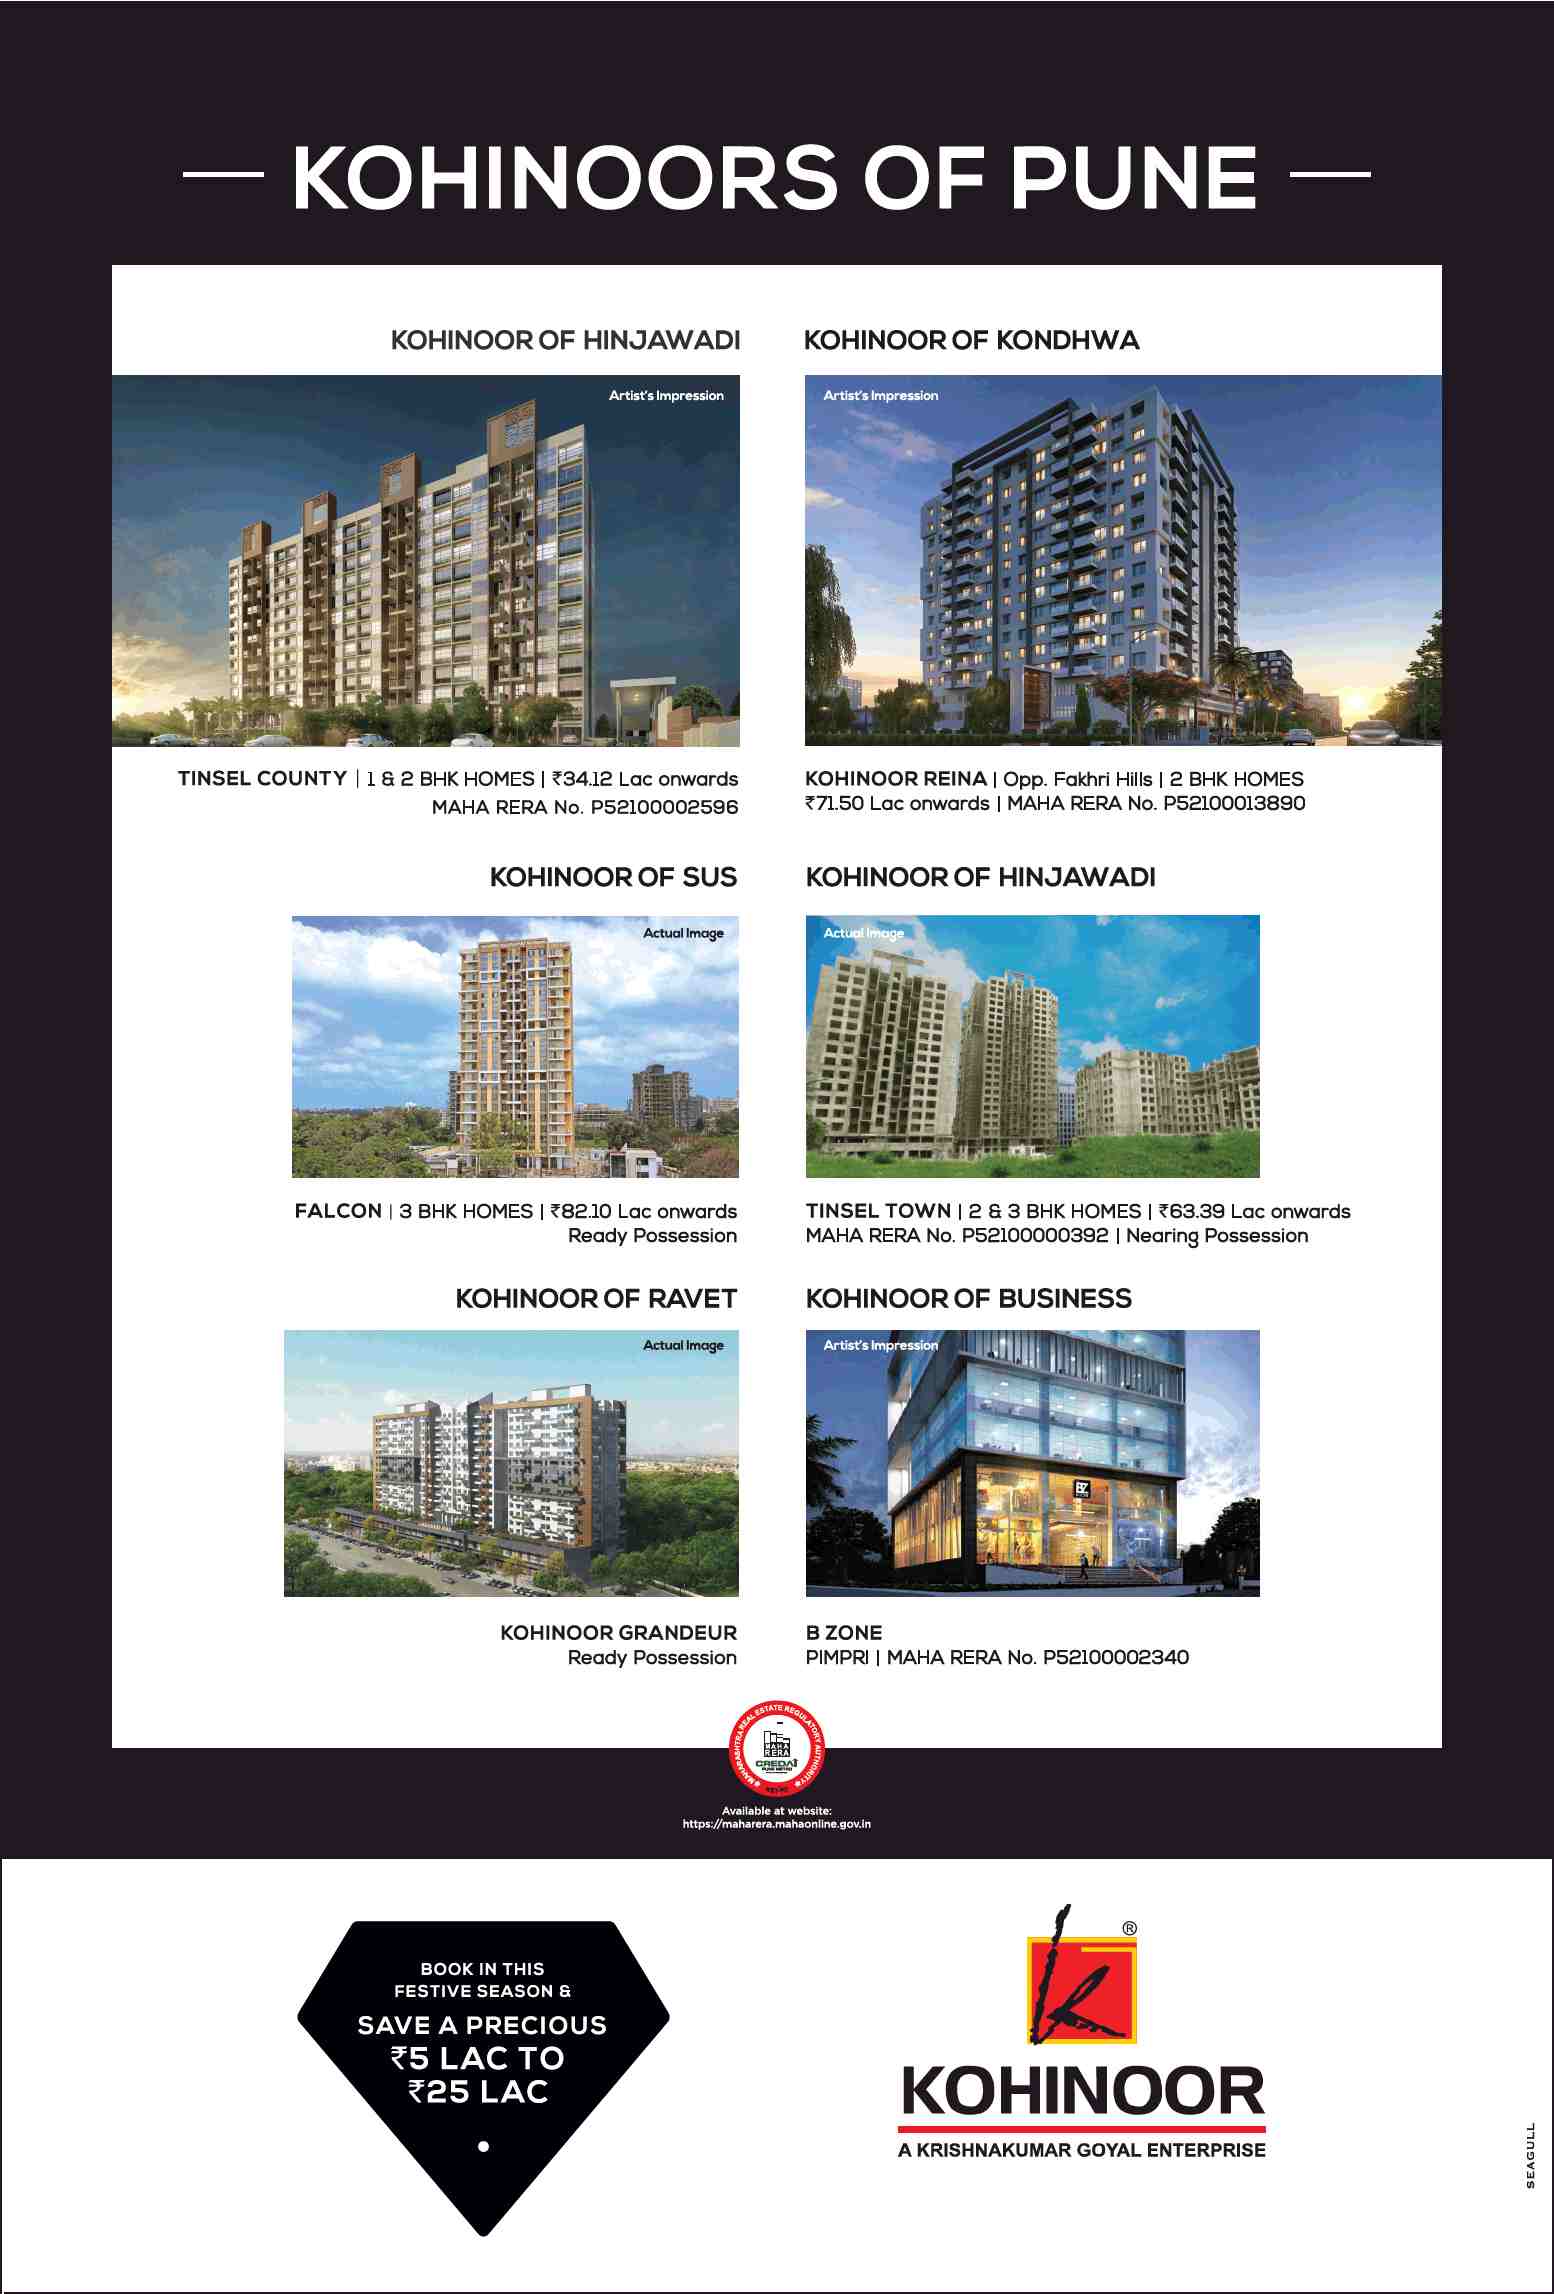 Book a property in Pune by Kohinoor Group in festive season & save up to Rs. 5 to 25 Lacs Update